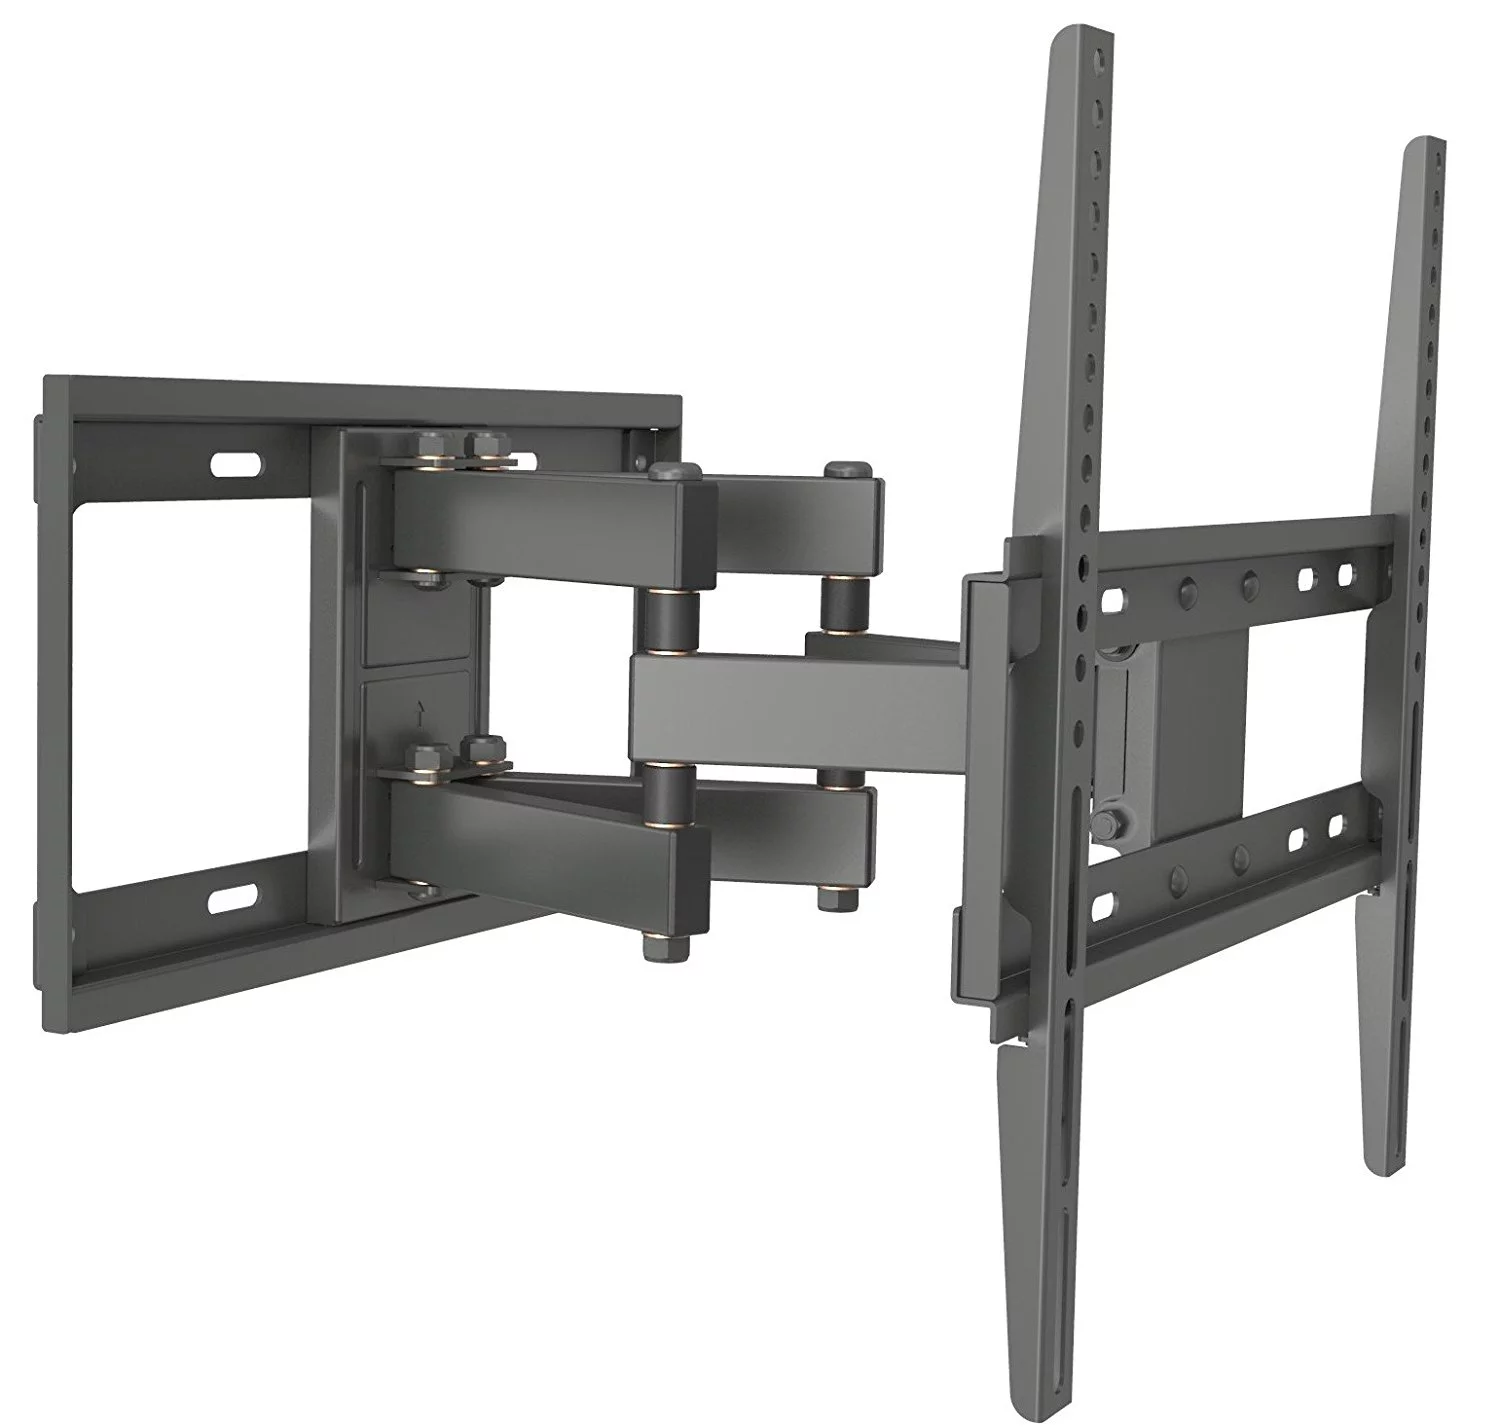 8 Amazing Tilt And Turn Television Wall Mounts For Flat Screens For 2023 1698311192 